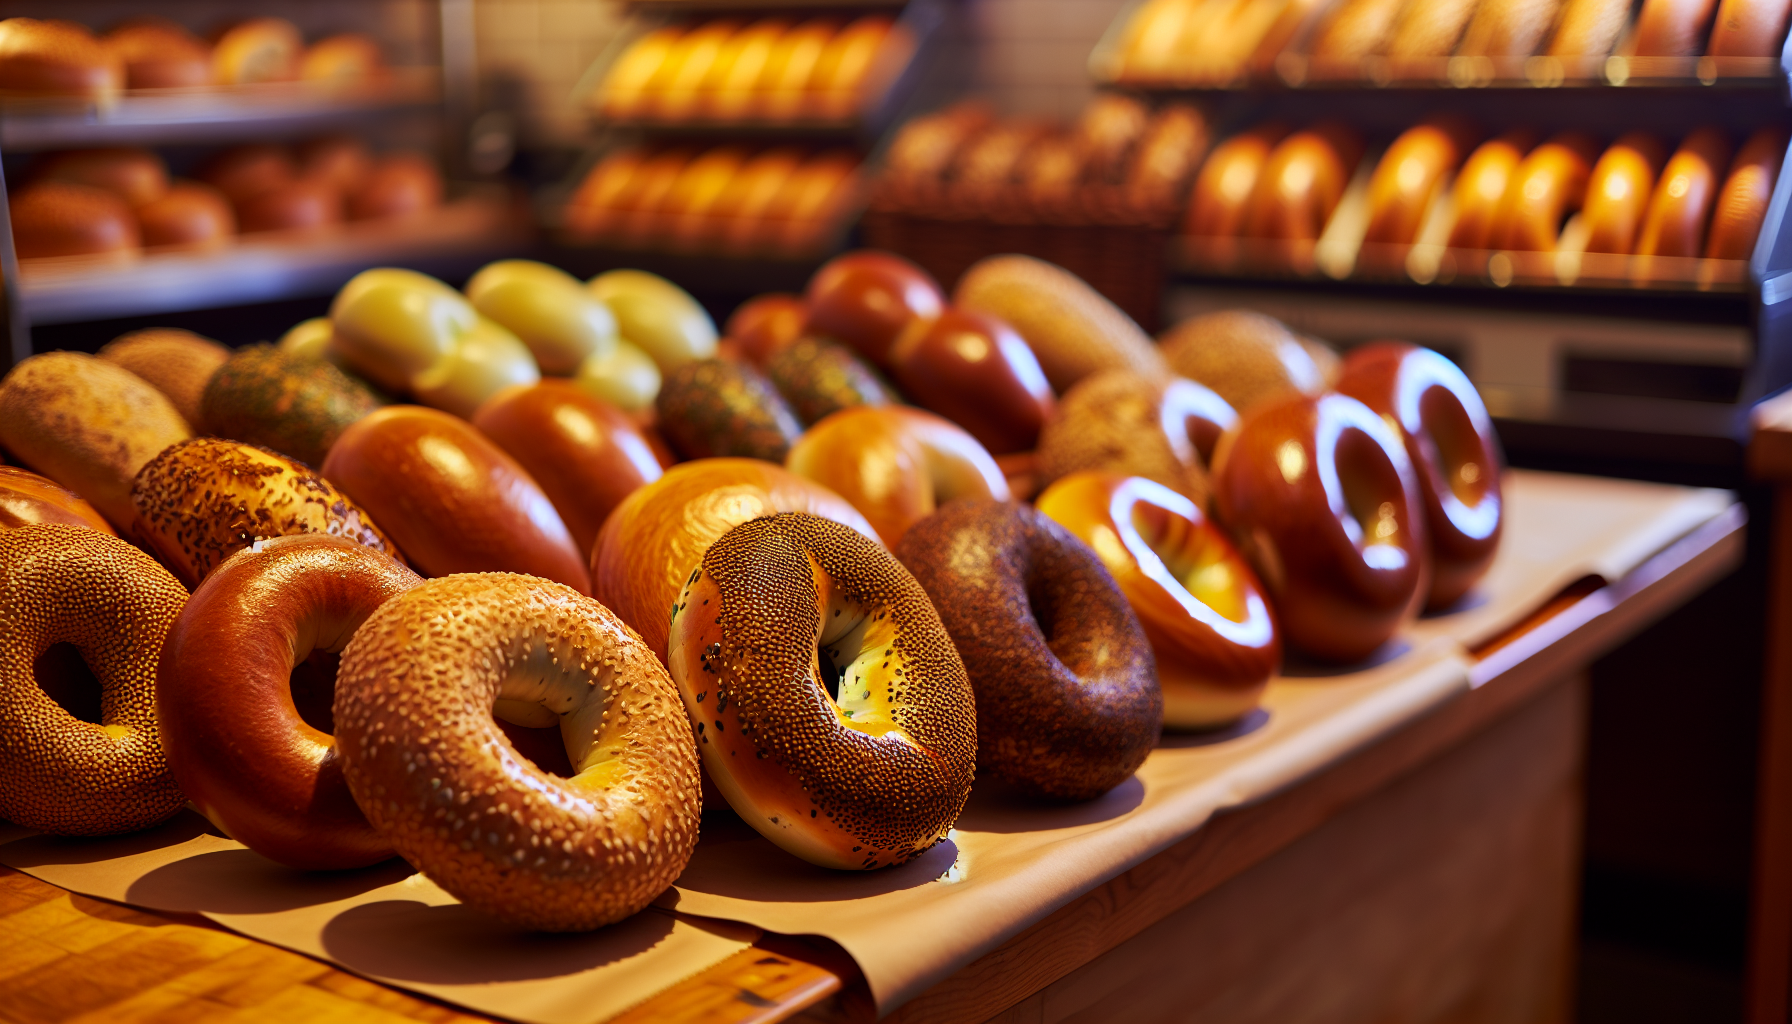 Variety of bagels in a bakery display